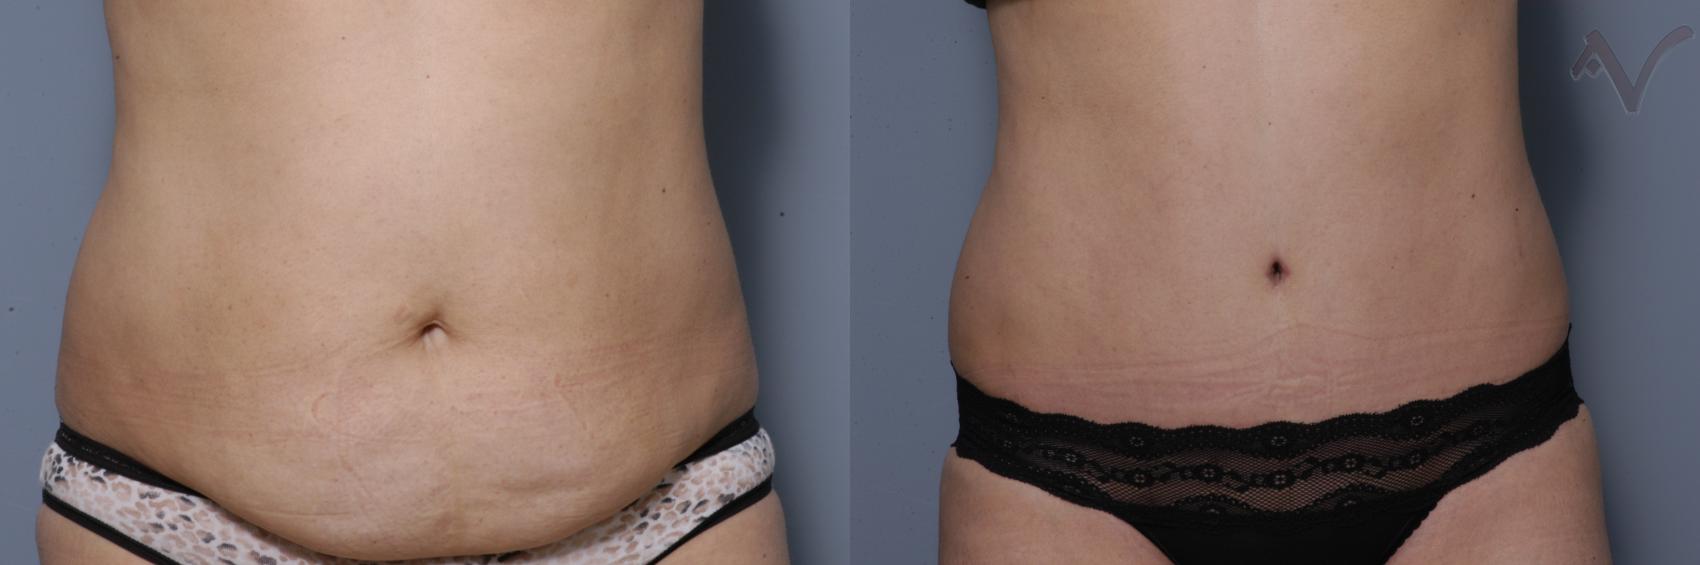 Will a Tummy Tuck Help Promote Continued Weight Loss?